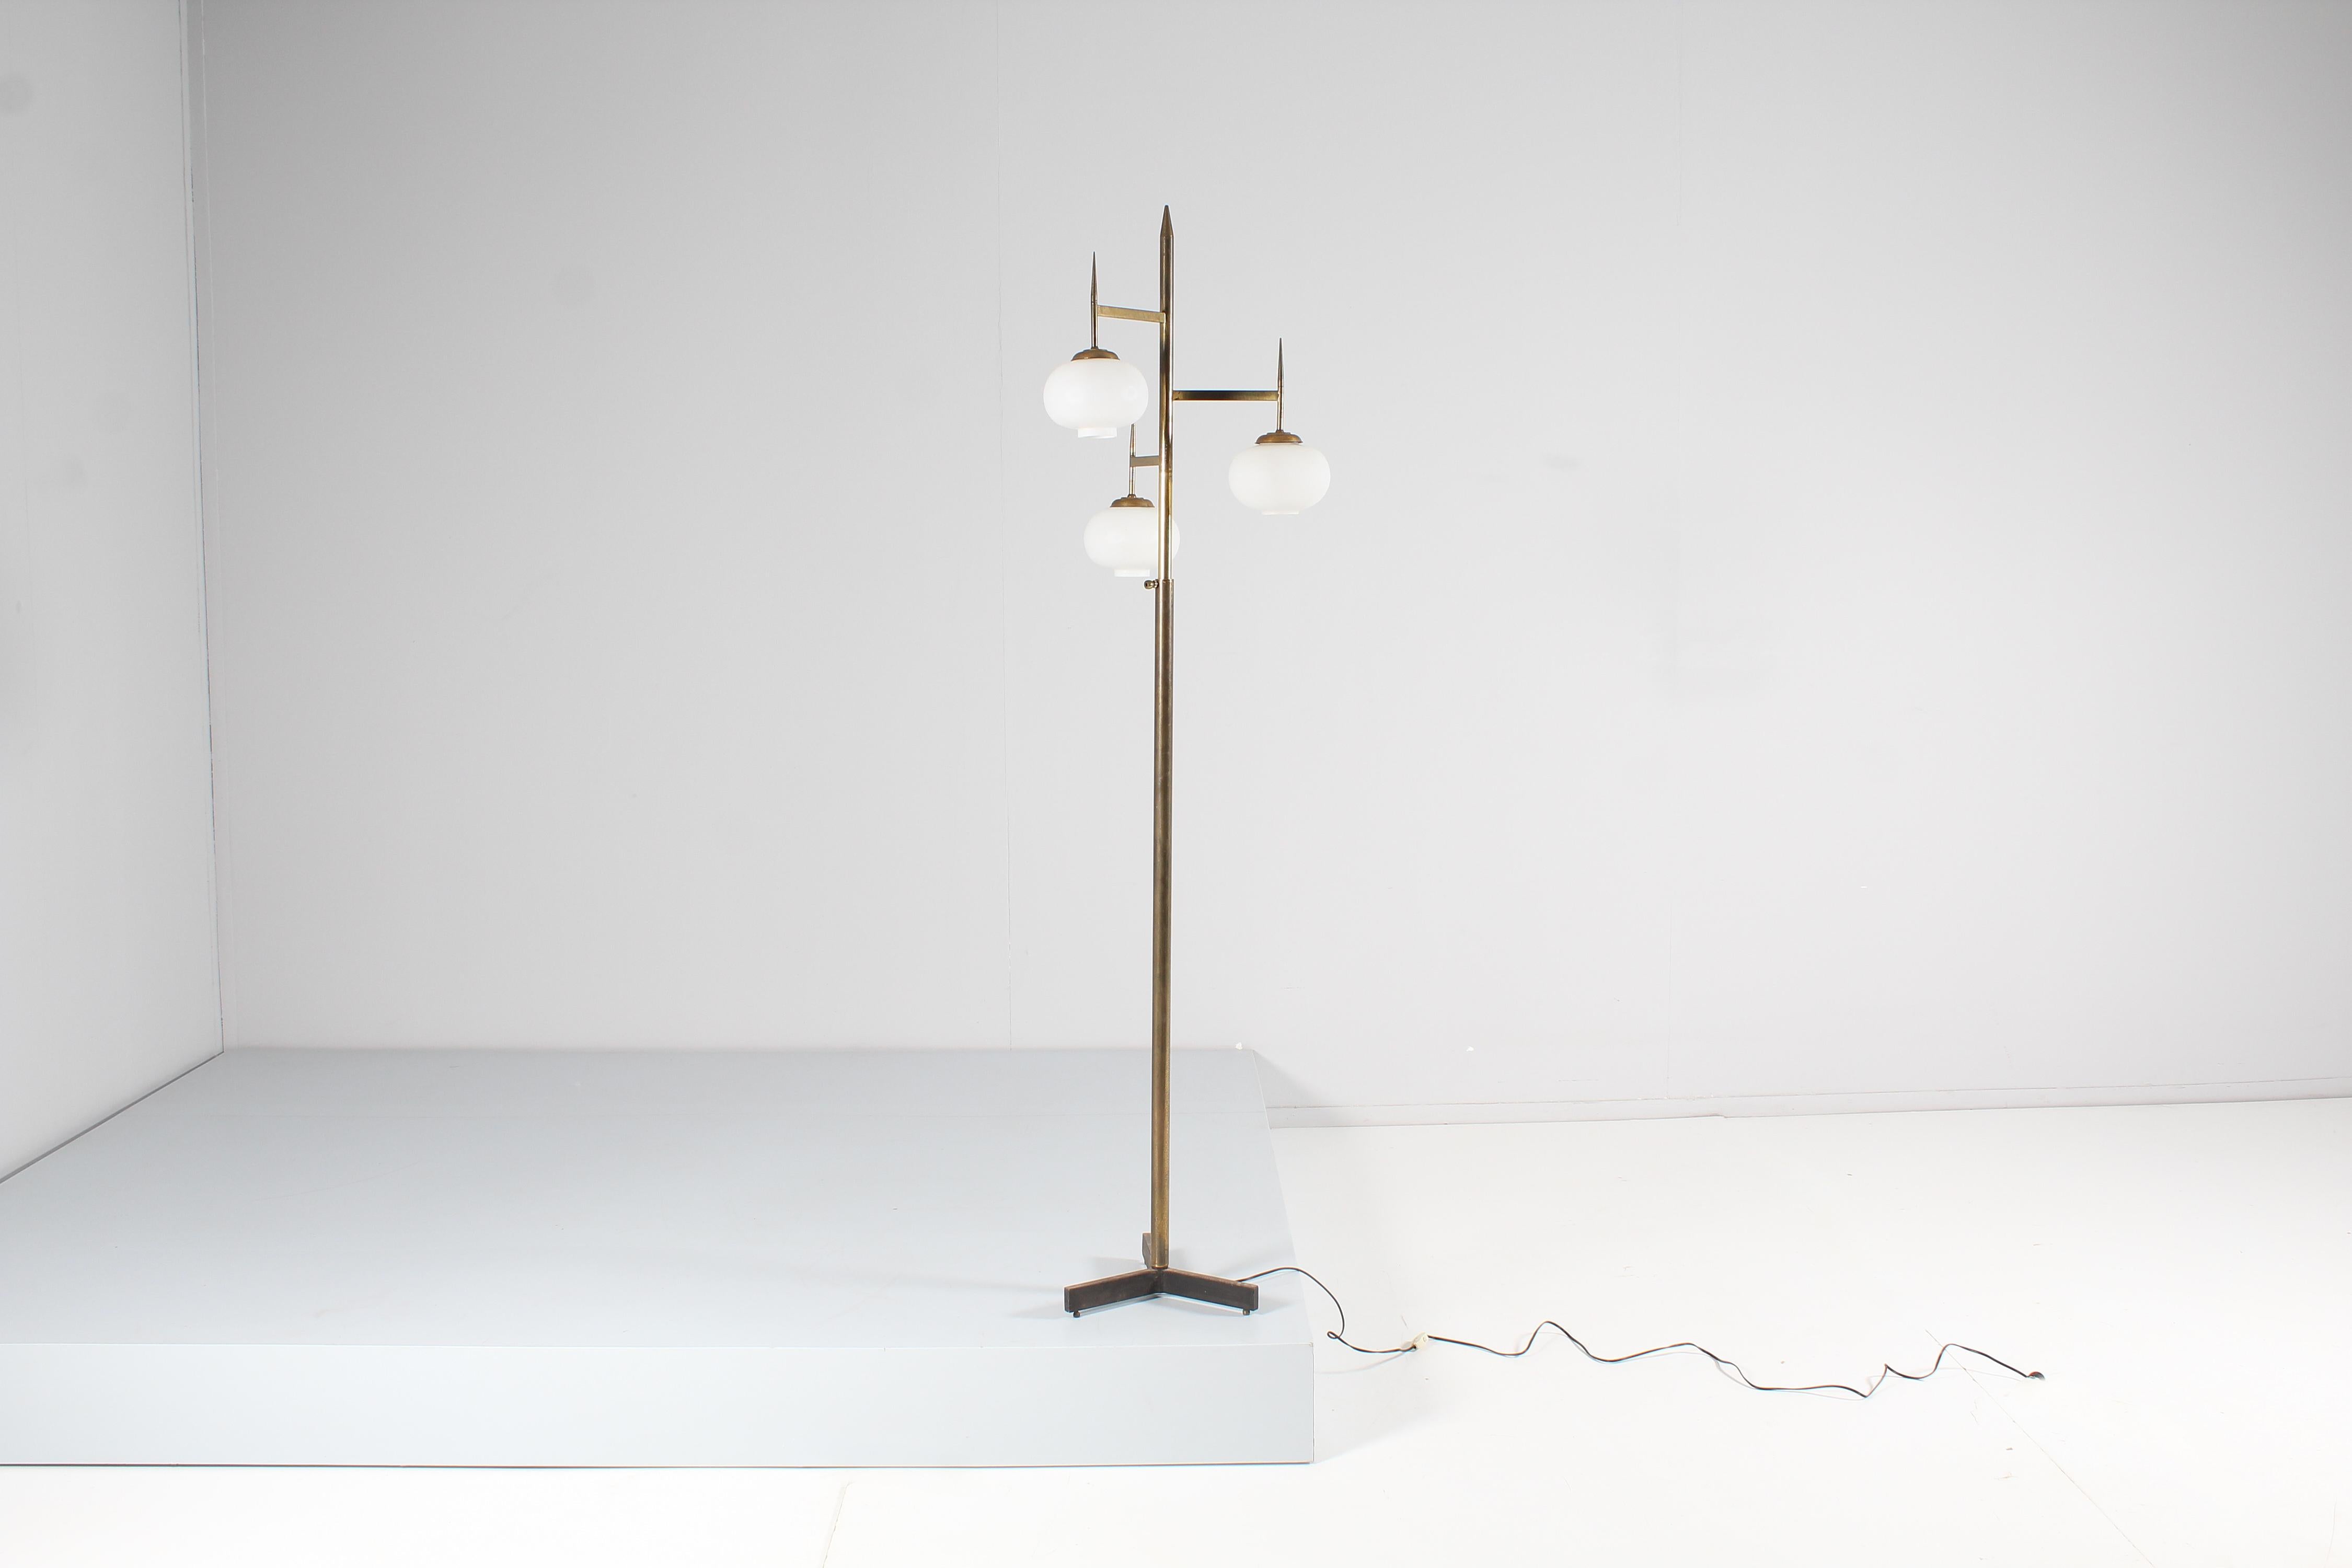 Very elegant floor lamp adjustable in height by means of a screw knob, with brass structure and three arms at staggered levels with satin white glass diffusers. Italian production attributed to Stilnovo, in the 1950s.
Wear consistent with age and